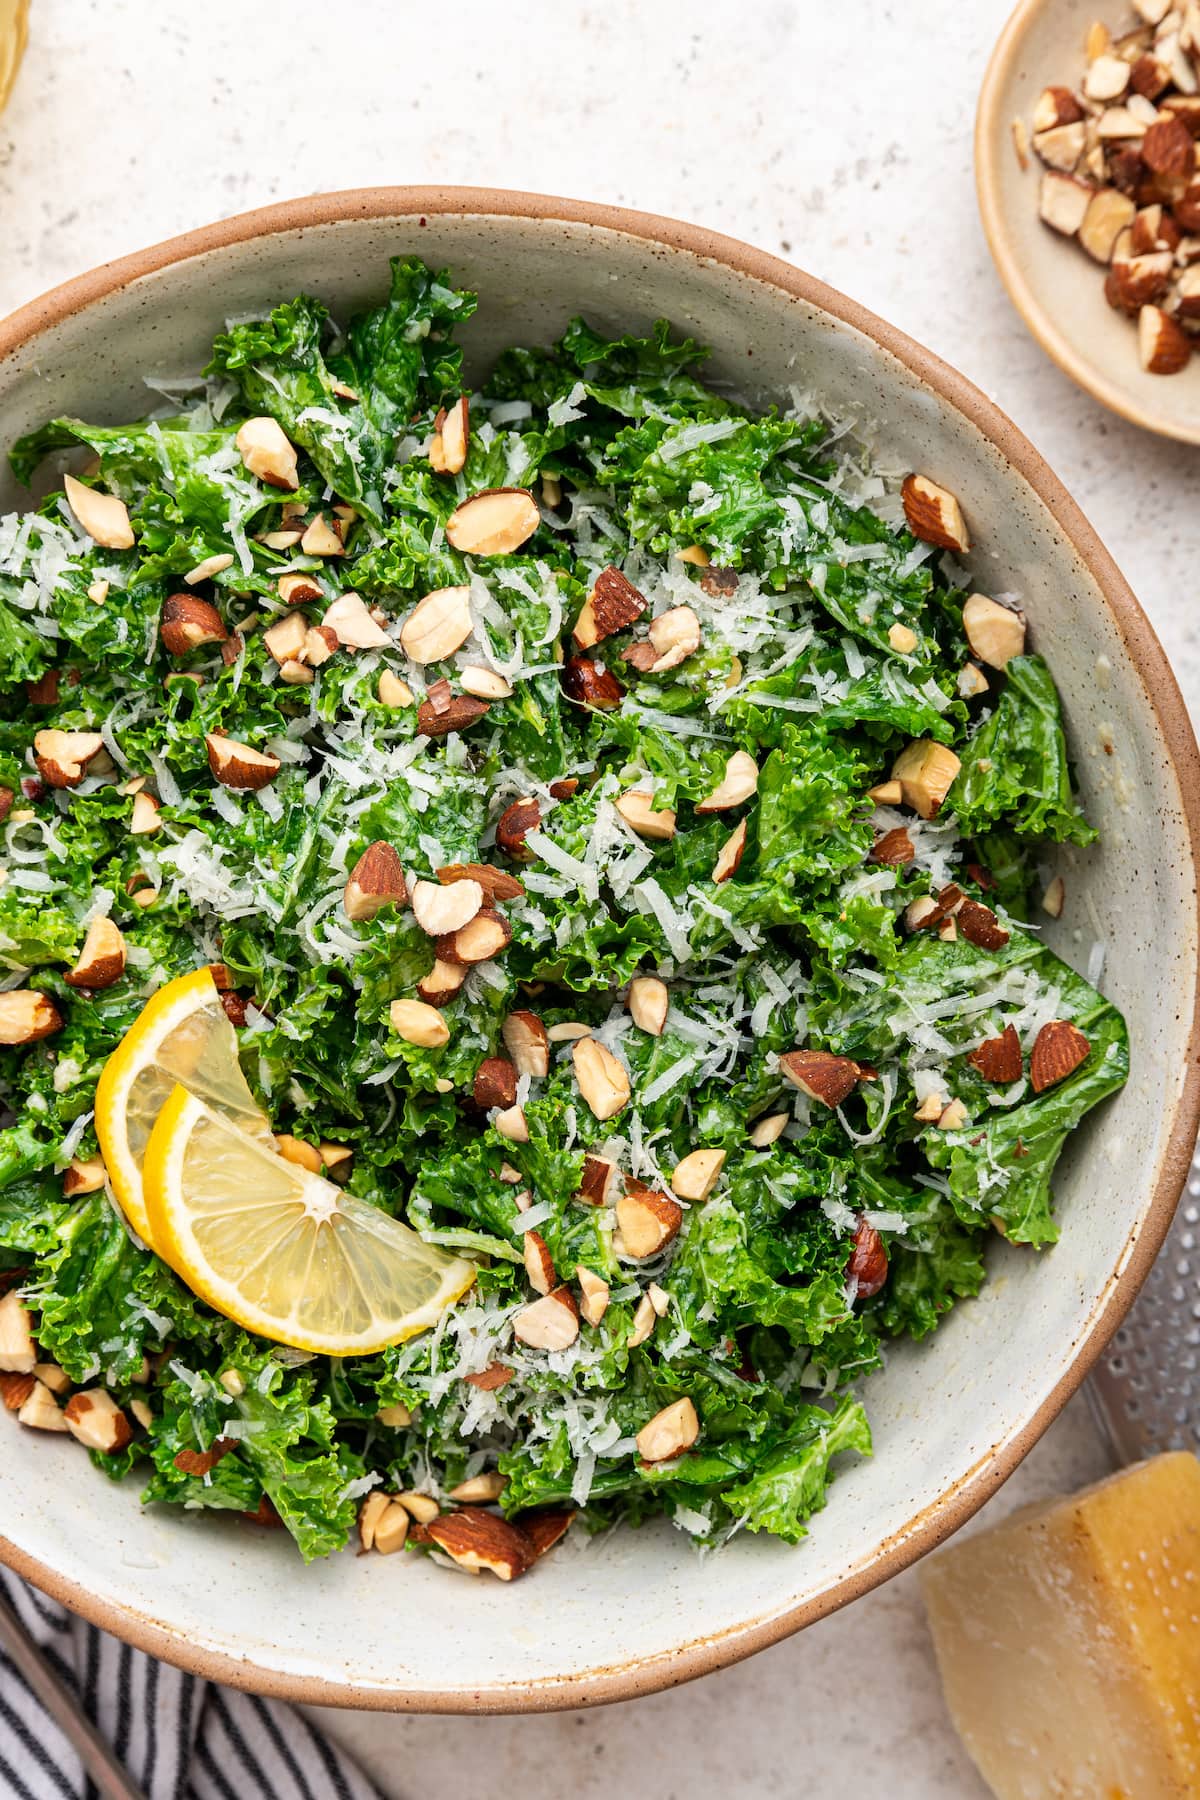 Kale salad in a serving bowl topped with almonds, parmesan cheese and lemon slices.